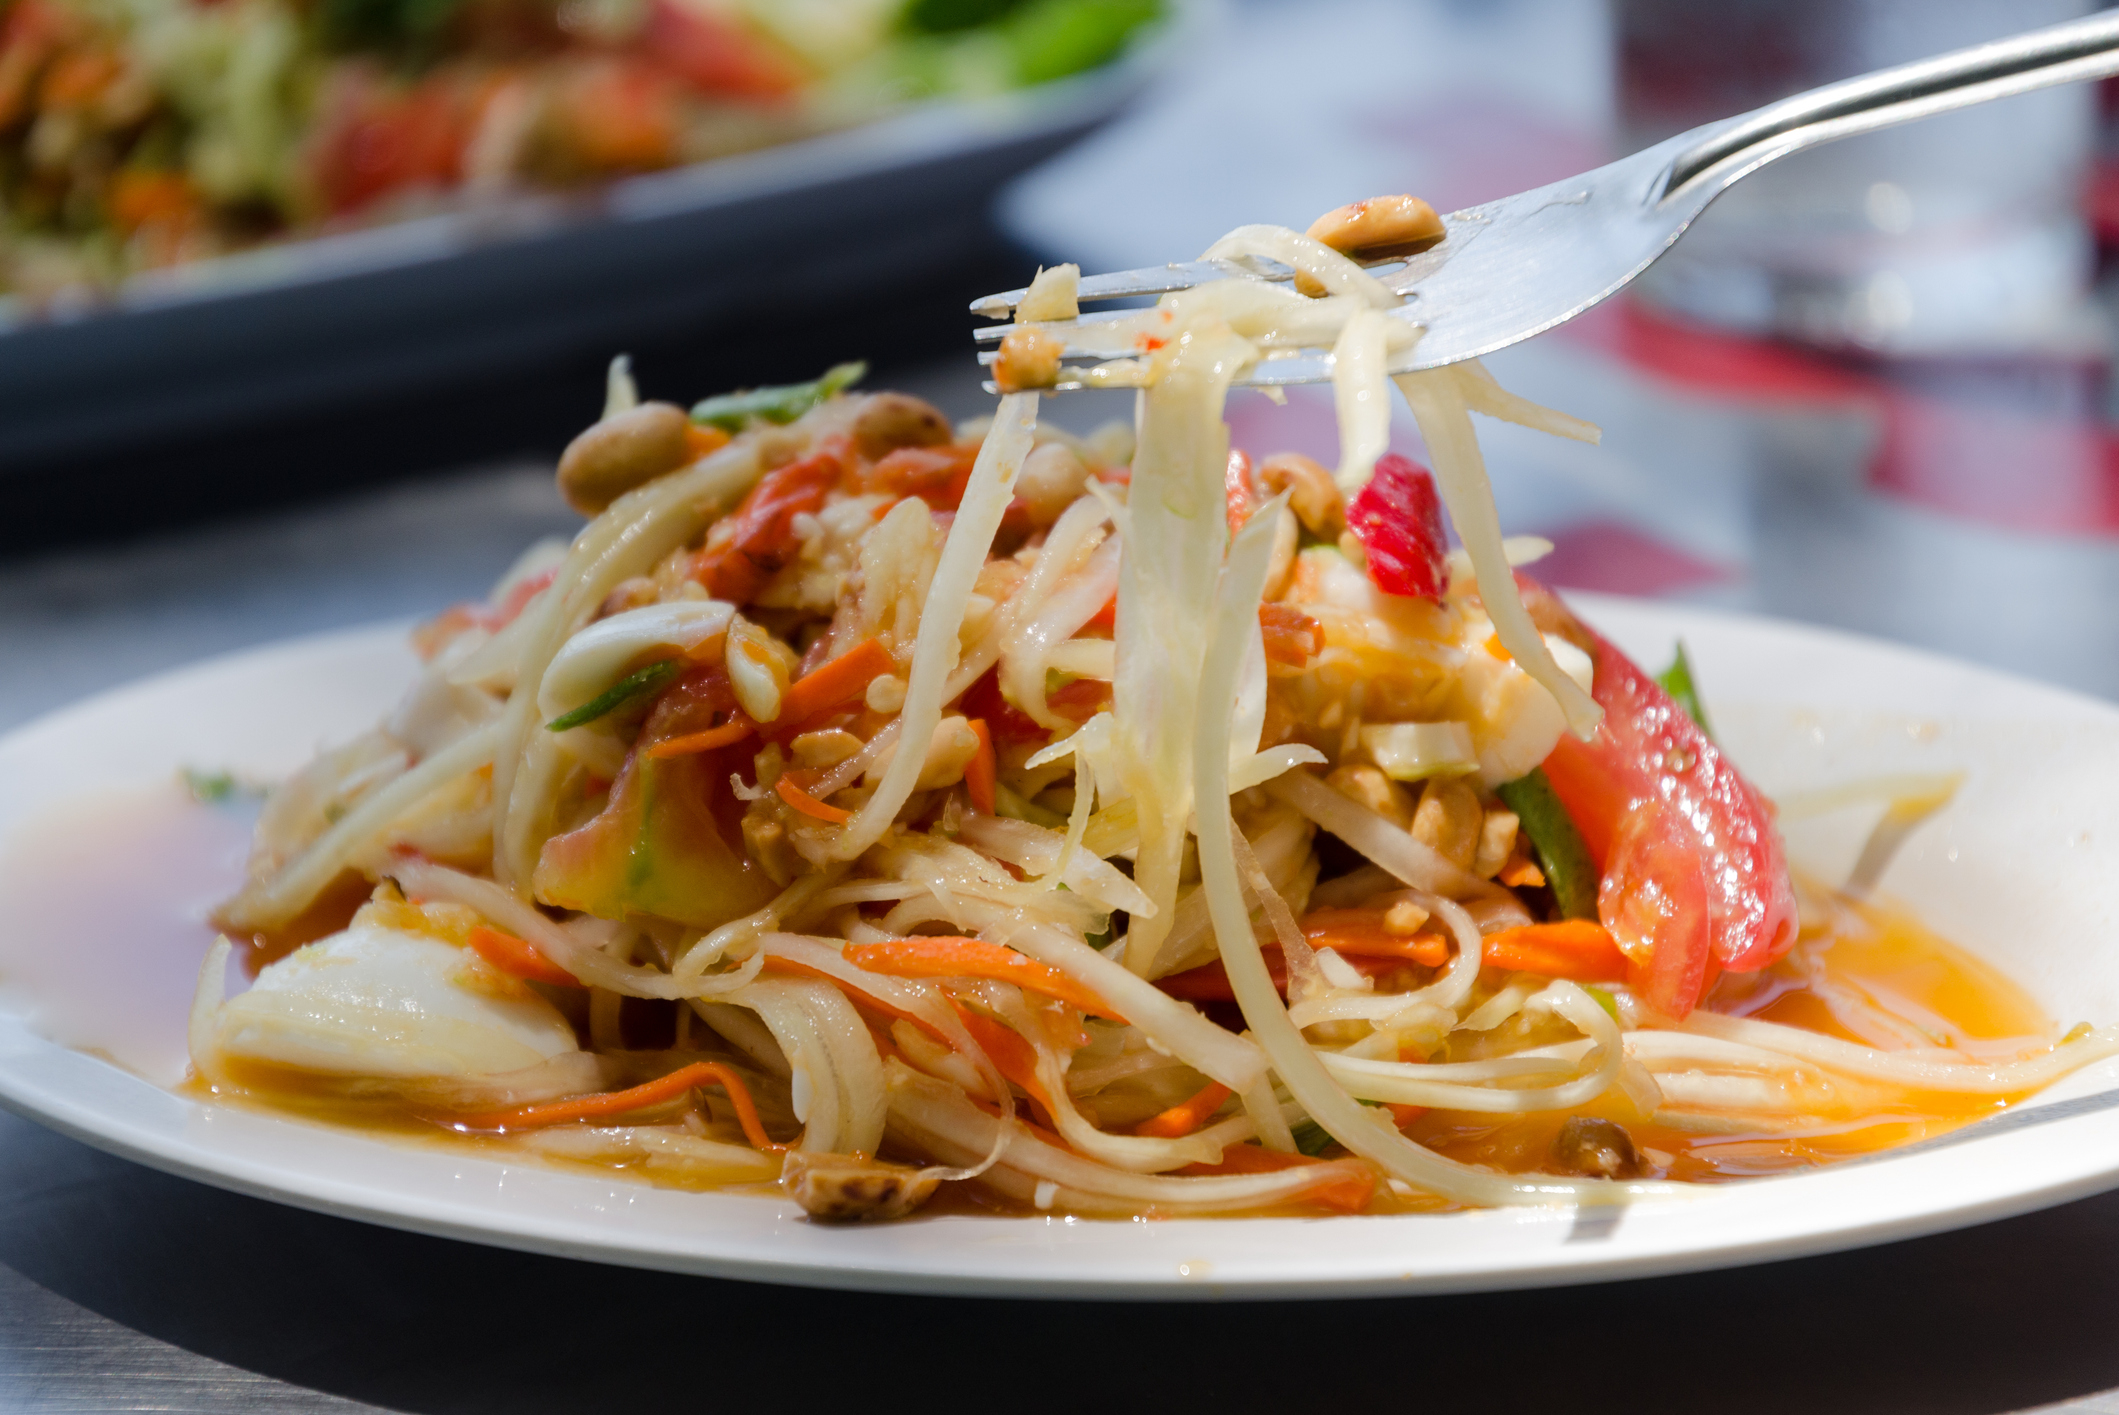 A plate of Pad Thai with a fork lifting some noodles, garnished with peanuts and mixed vegetables